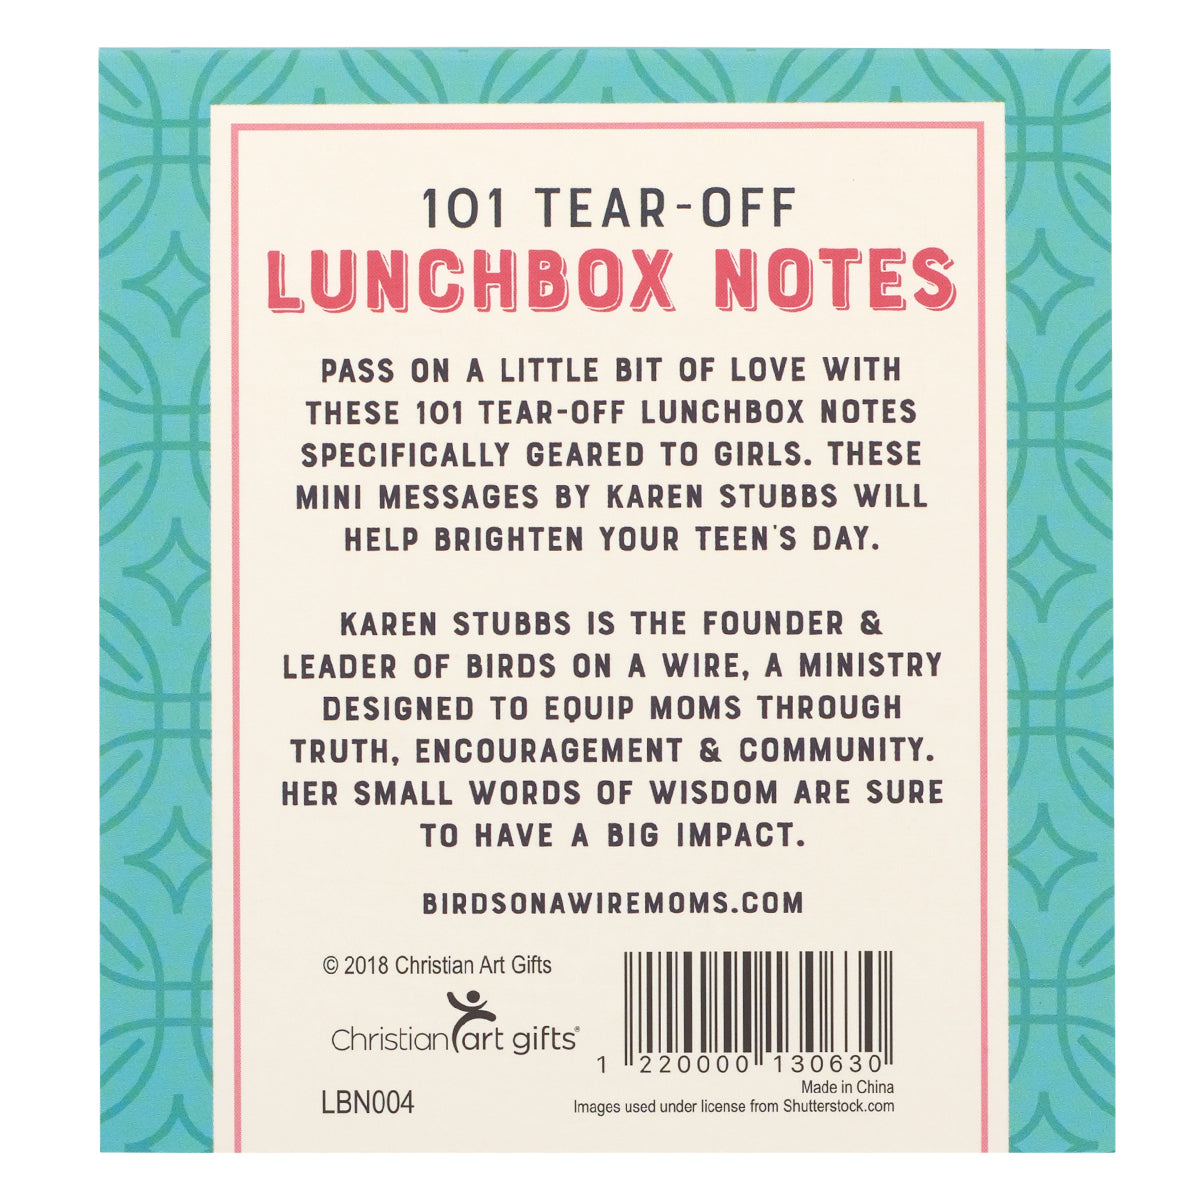 101 Lunchbox Notes For Girls - The Christian Gift Company